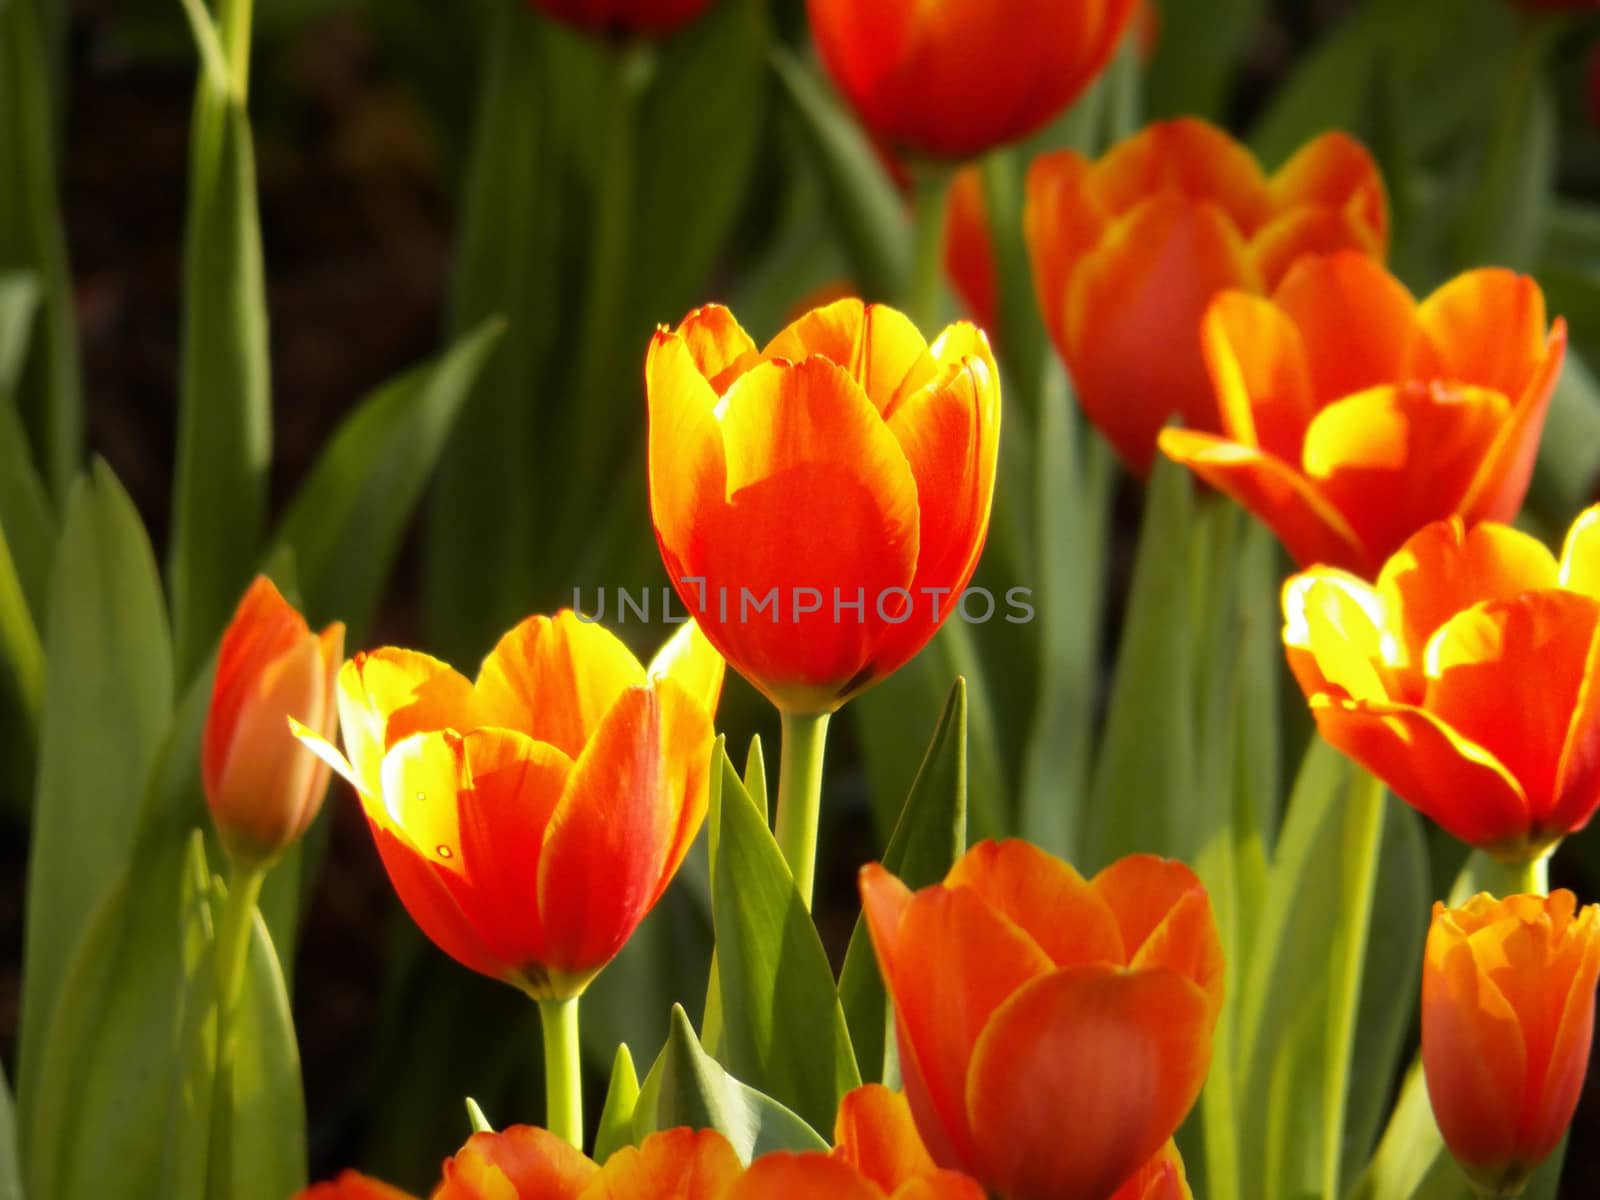 colorful tulips by dekzer007